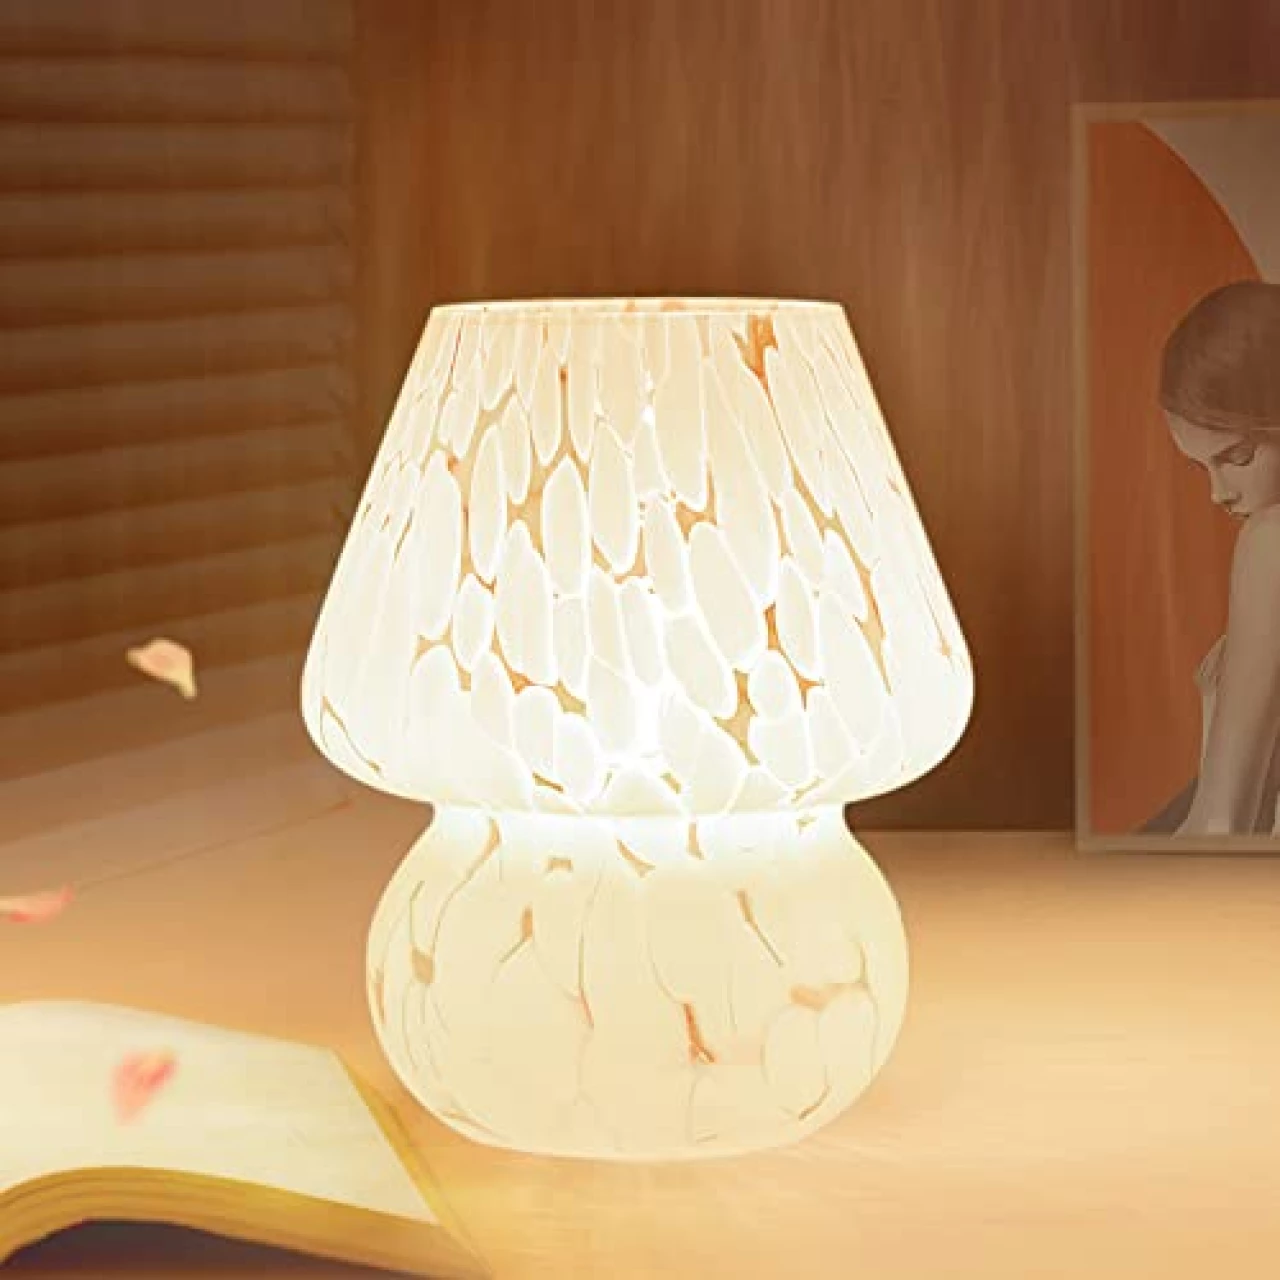 ONEWISH Mushroom Lamp Small Bedside Table Lamp-Nightstand Light Fully Dimmable, Translucent Glass Lamp for Bedroom Living Kitchen, Murano Aesthetic Lamp Birthday Gift White